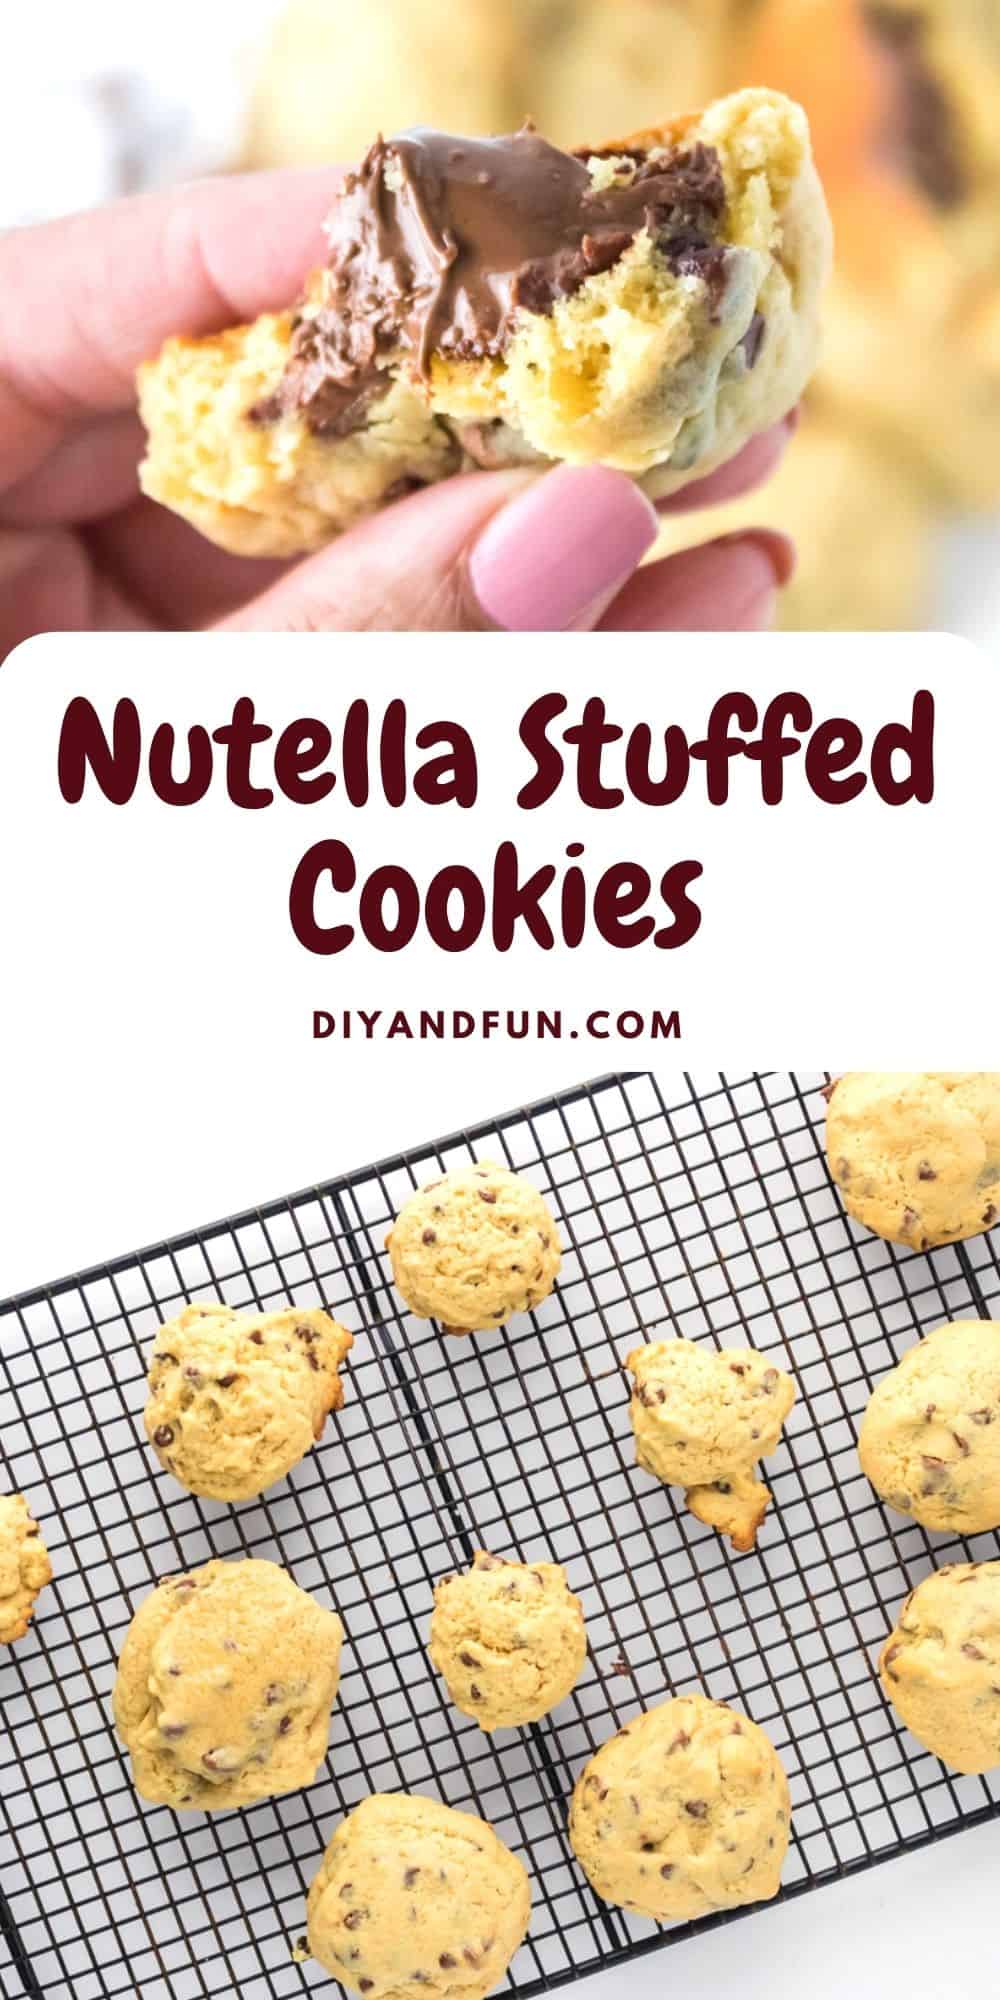 Nutella Stuffed Chocolate Chip Cookies, a delicious dessert or snack recipe featuring hazelnut cocoa filled cookie.